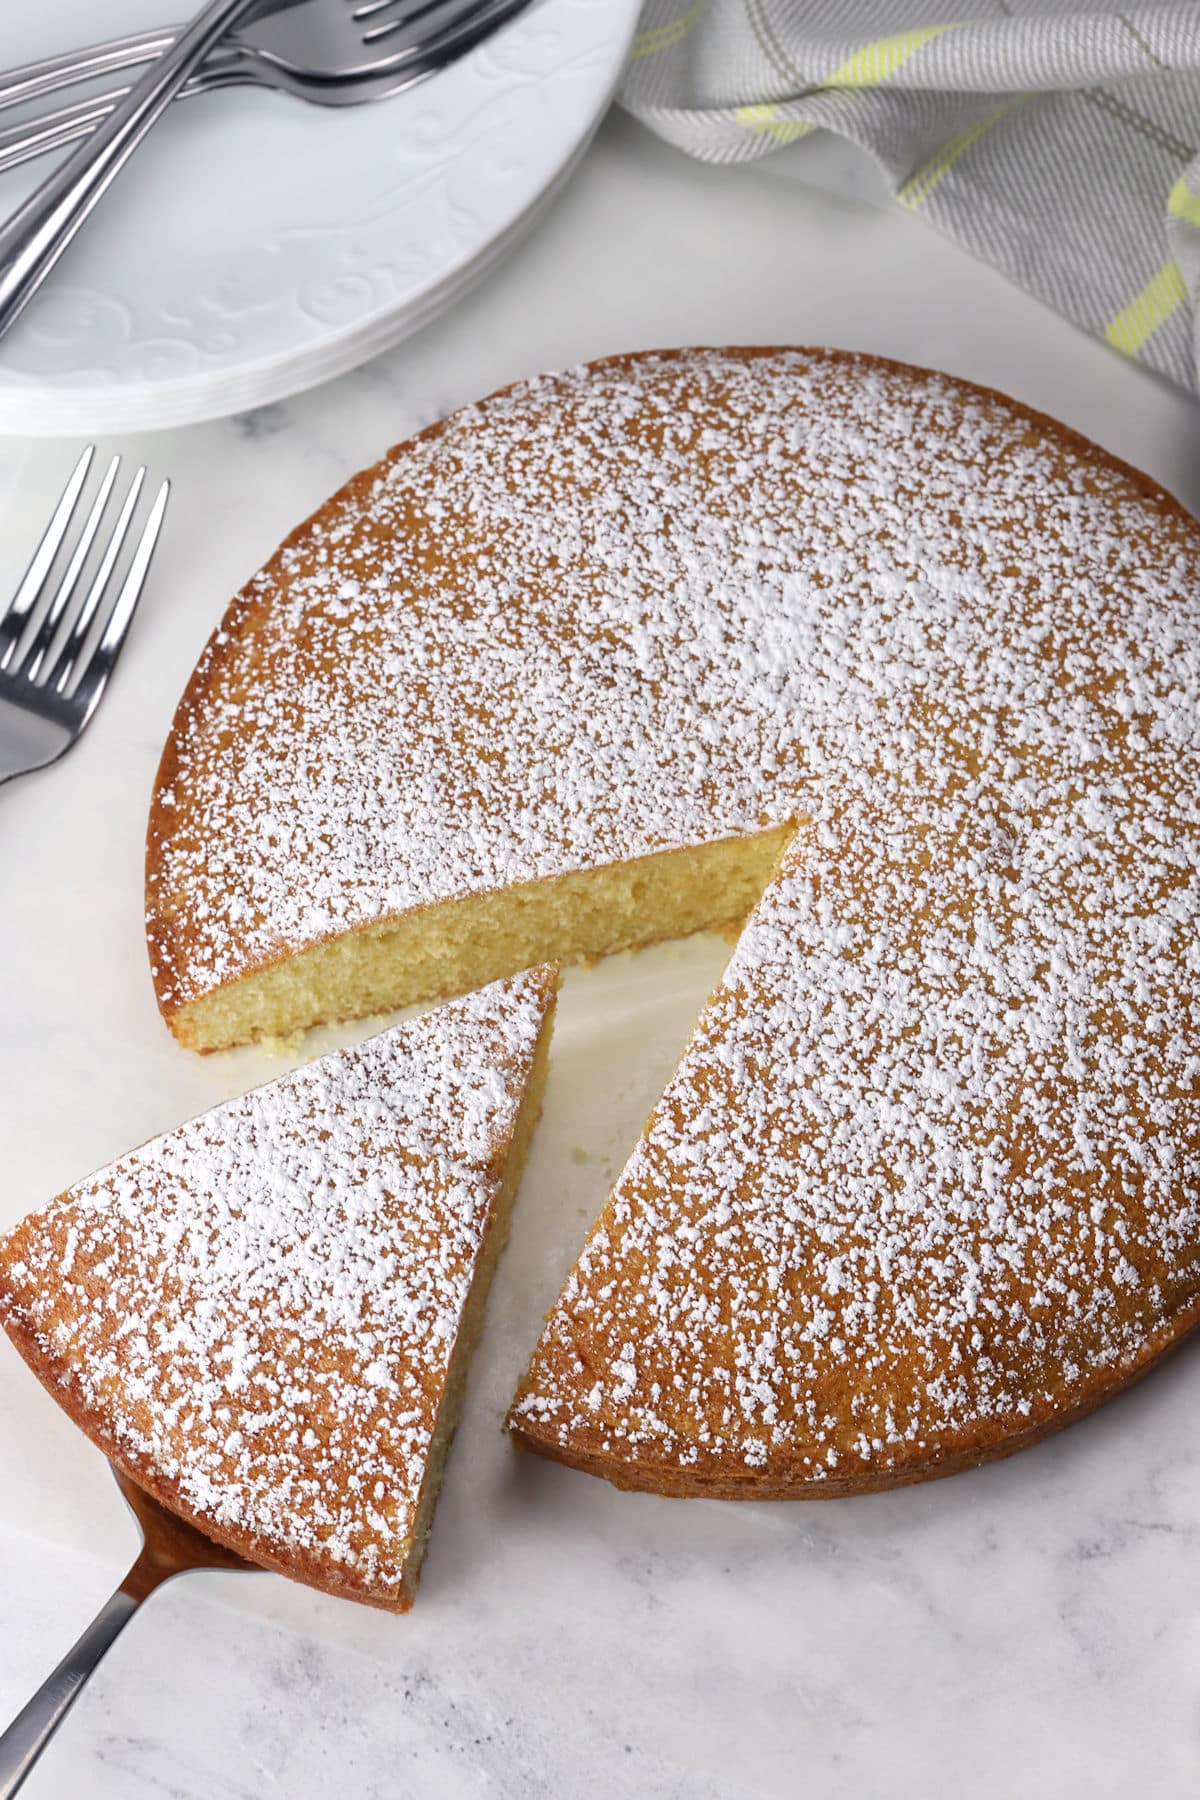 An Irish tea cake dusted with confectioner's sugar.